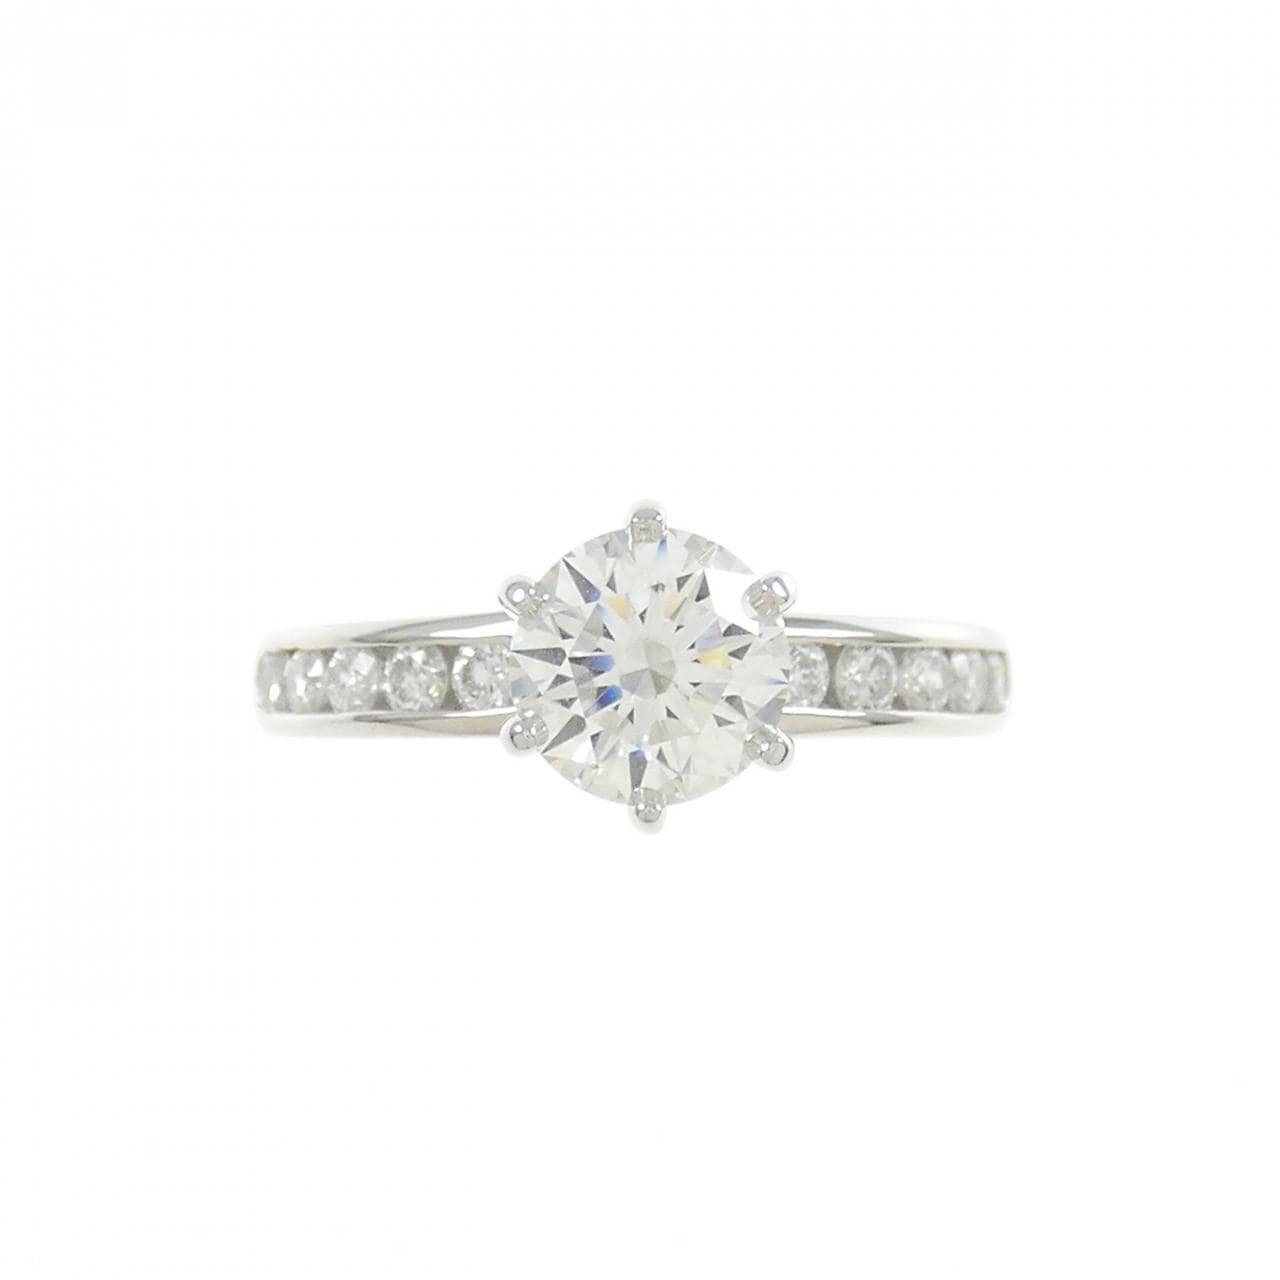 TIFFANY Solitaire Channel Setting Ring 1.02CT H VVS1 3EXT